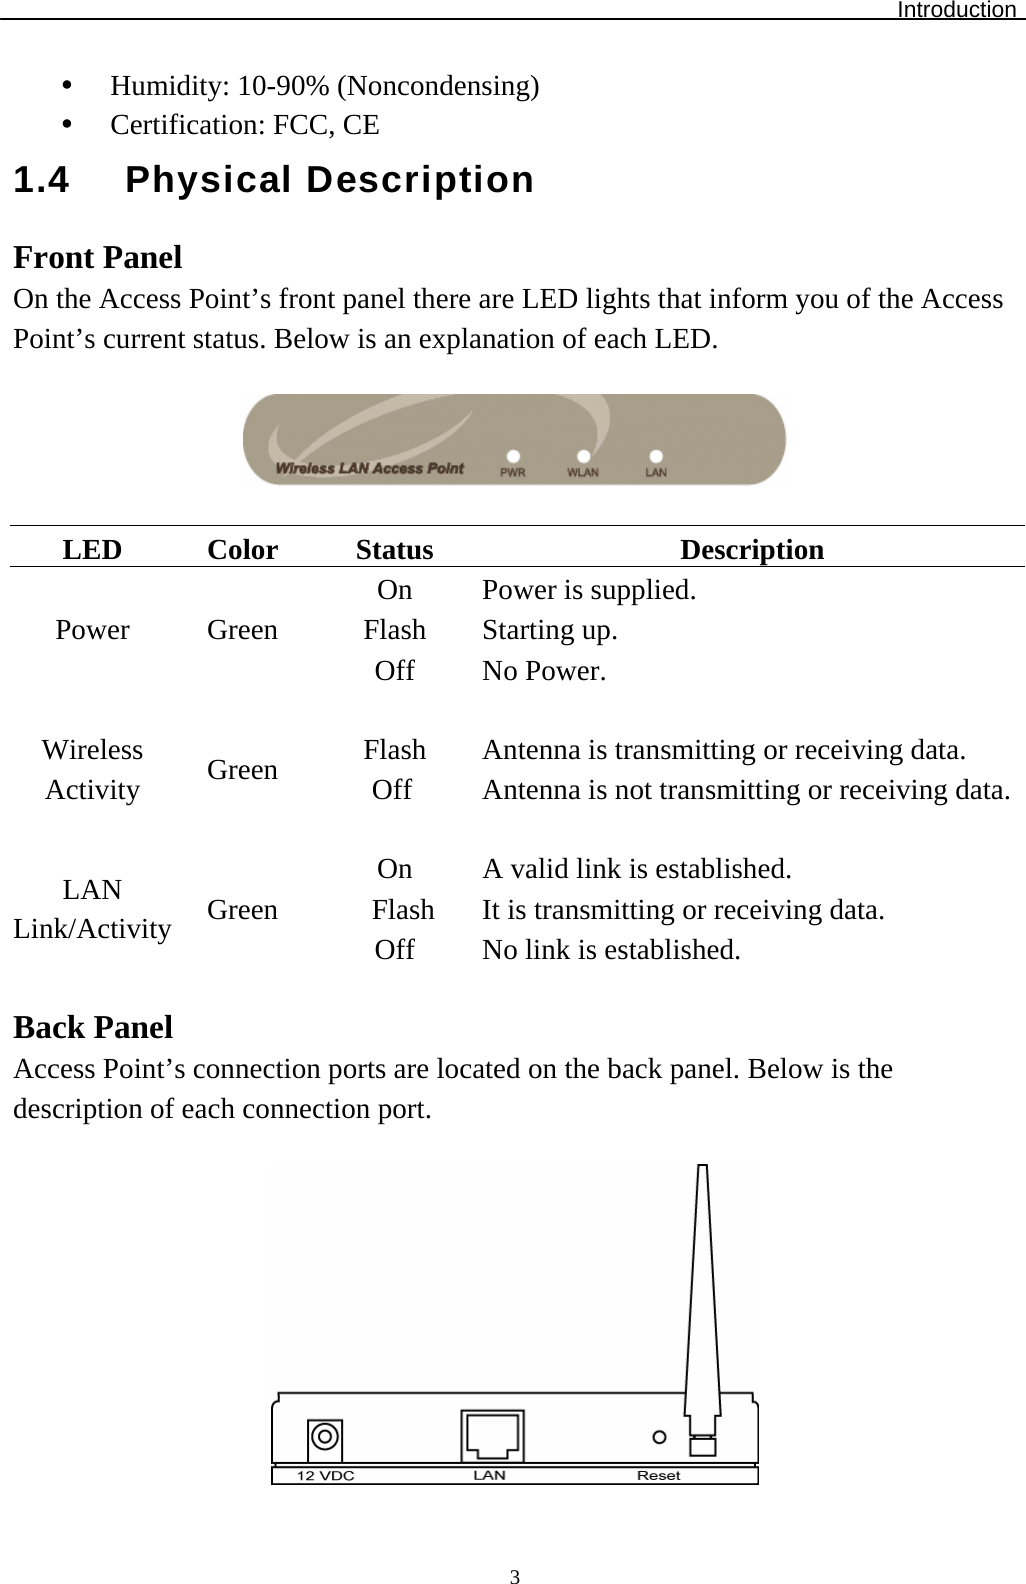 Introduction  3y Humidity: 10-90% (Noncondensing) y Certification: FCC, CE 1.4 Physical Description Front Panel On the Access Point’s front panel there are LED lights that inform you of the Access Point’s current status. Below is an explanation of each LED.    LED Color Status  Description On   Power is supplied. Flash Starting up. Power Green Off No Power.     Flash  Antenna is transmitting or receiving data. Wireless Activity  Green  Off  Antenna is not transmitting or receiving data.    On  A valid link is established. Flash  It is transmitting or receiving data. LAN Link/Activity  Green Off  No link is established.  Back Panel Access Point’s connection ports are located on the back panel. Below is the description of each connection port.   